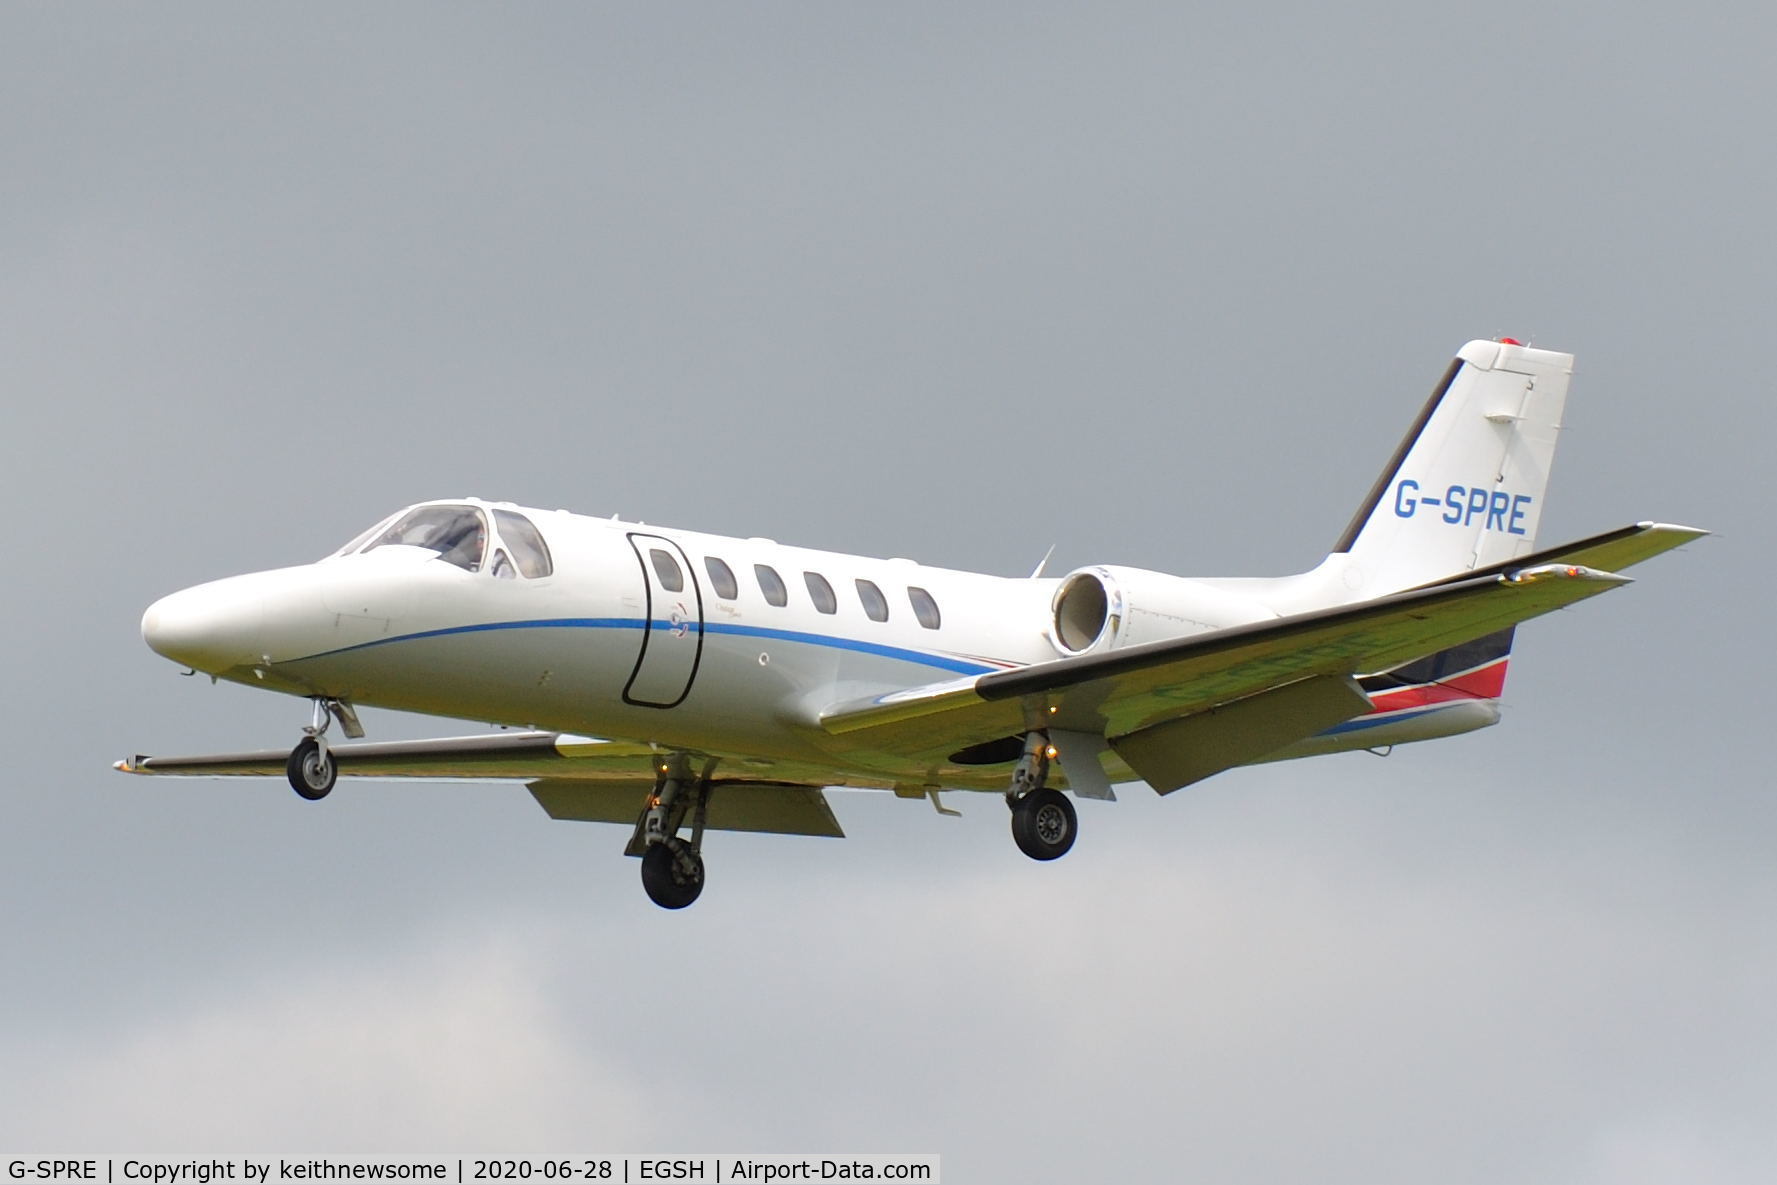 G-SPRE, 1999 Cessna 550 Citation Bravo C/N 550-0872, Arriving at Norwich from Belfast.